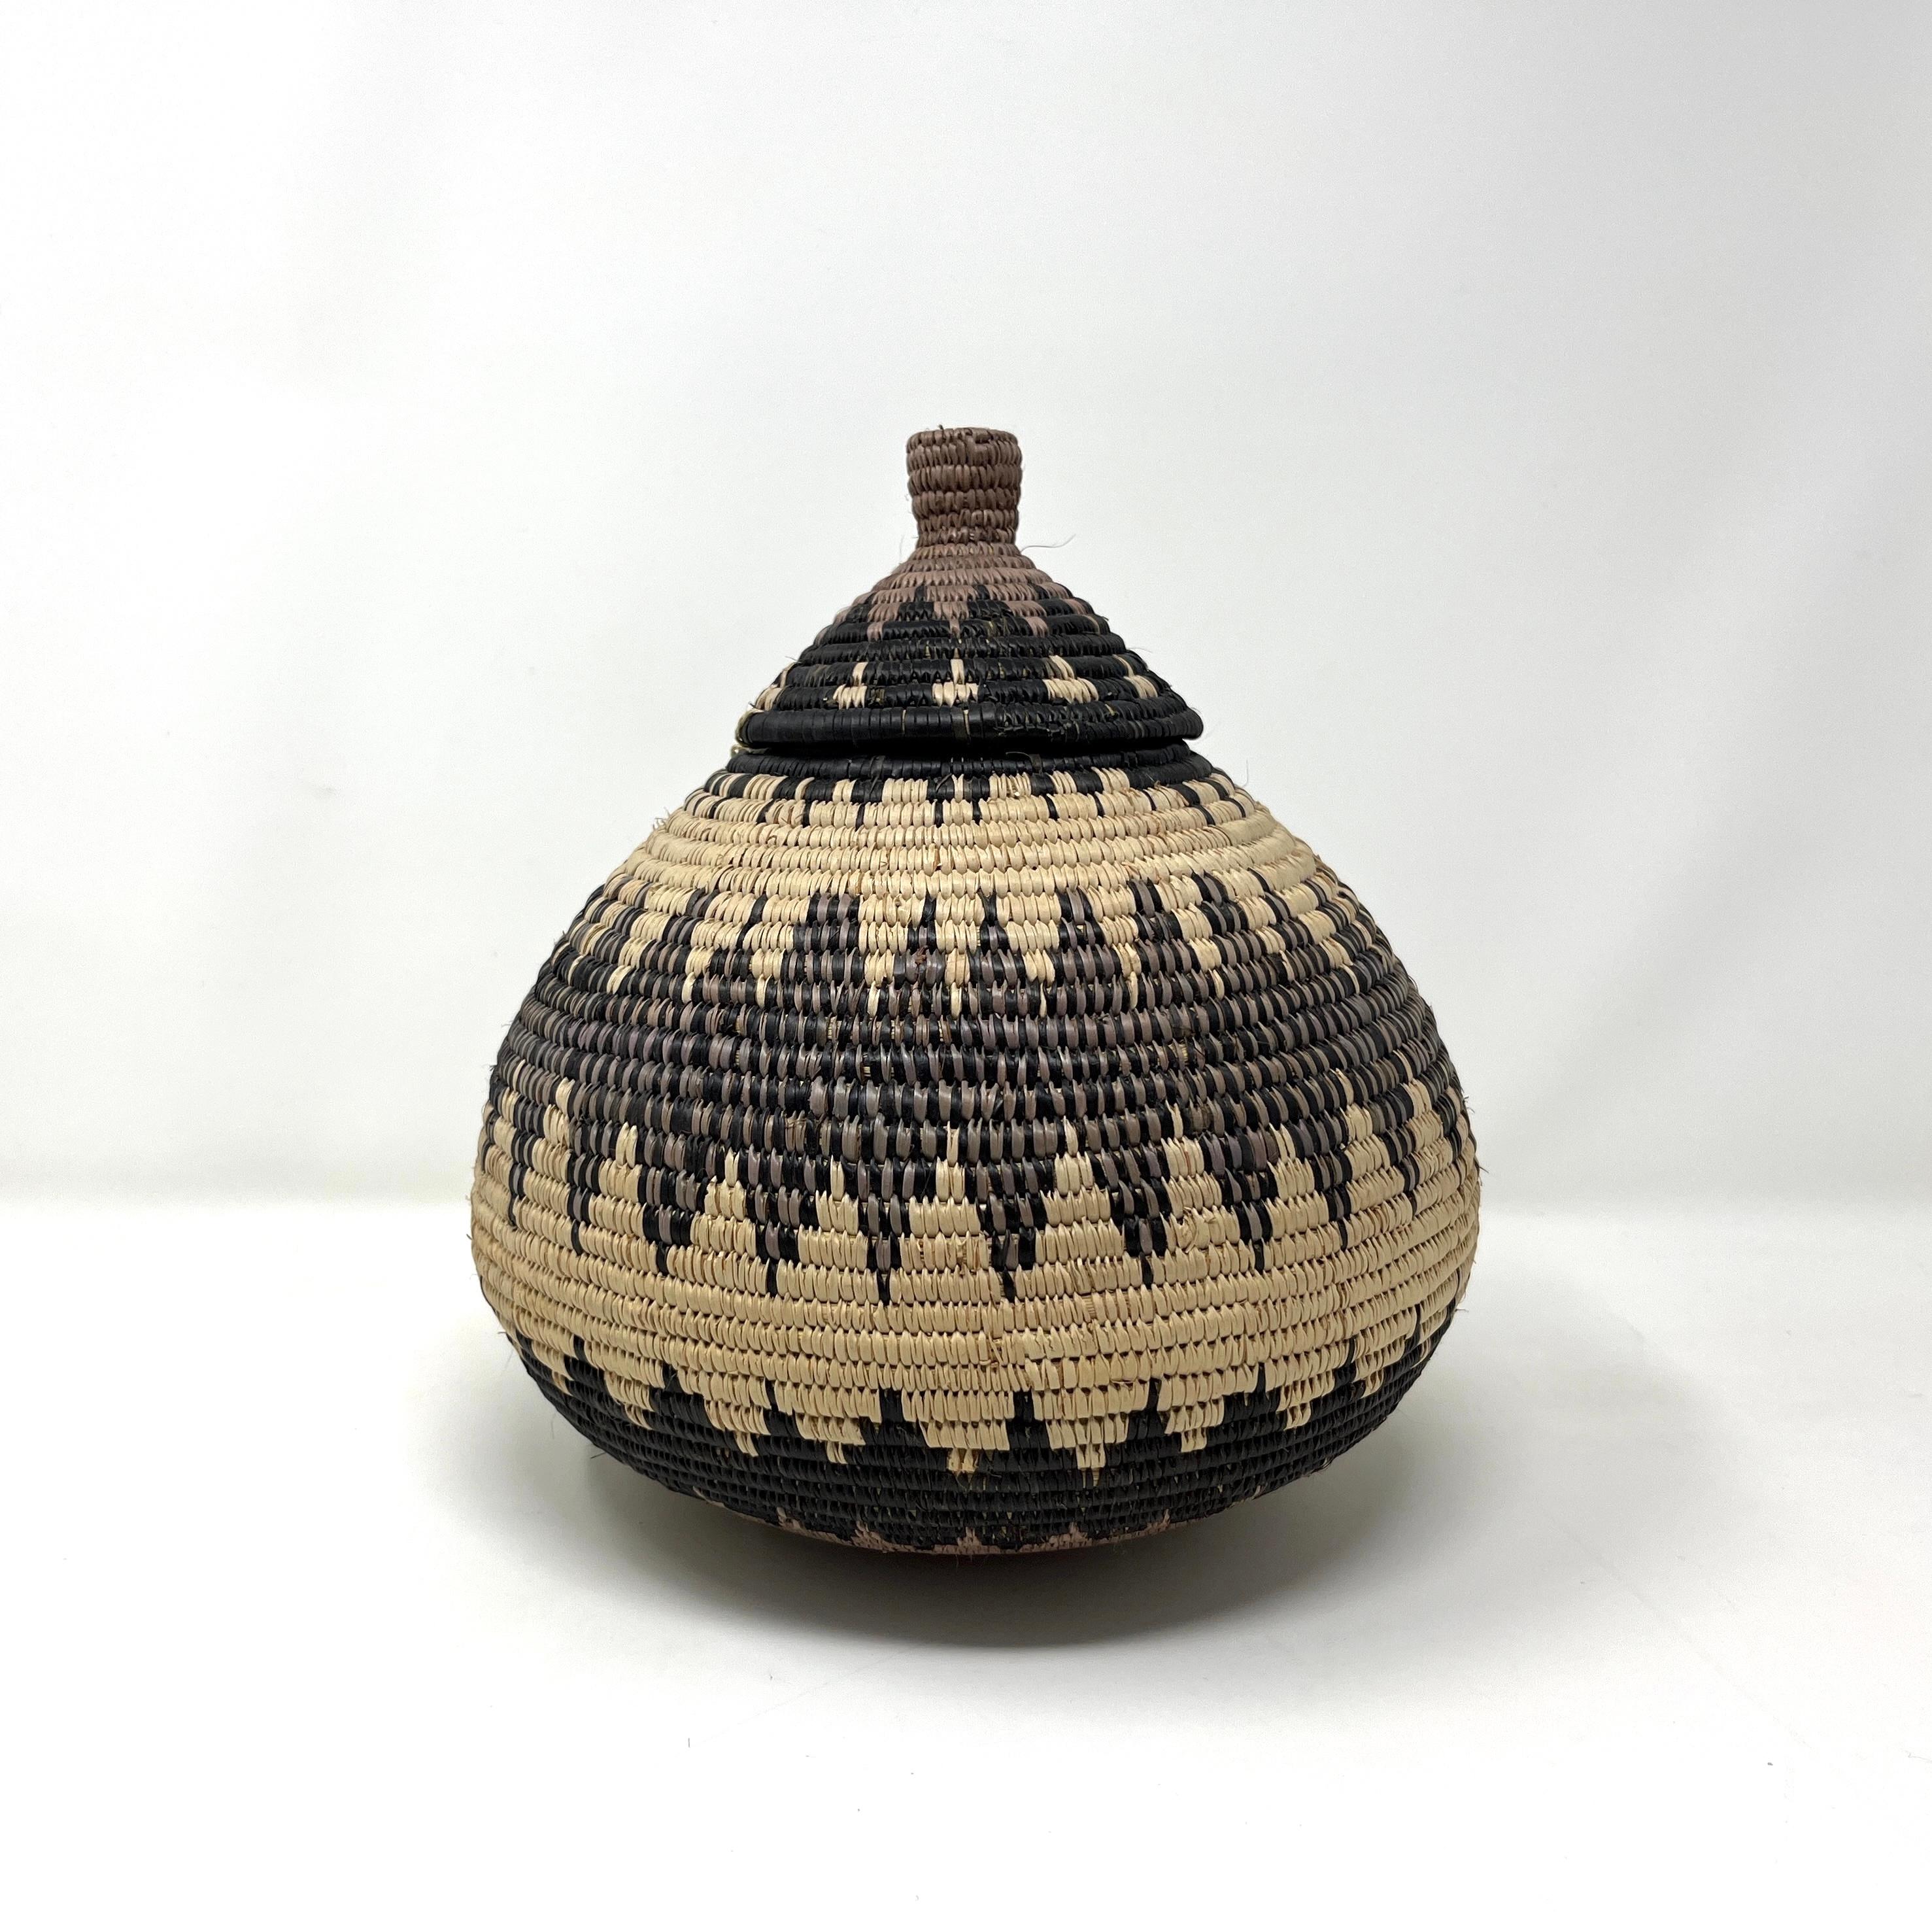 South African Bowls and Baskets